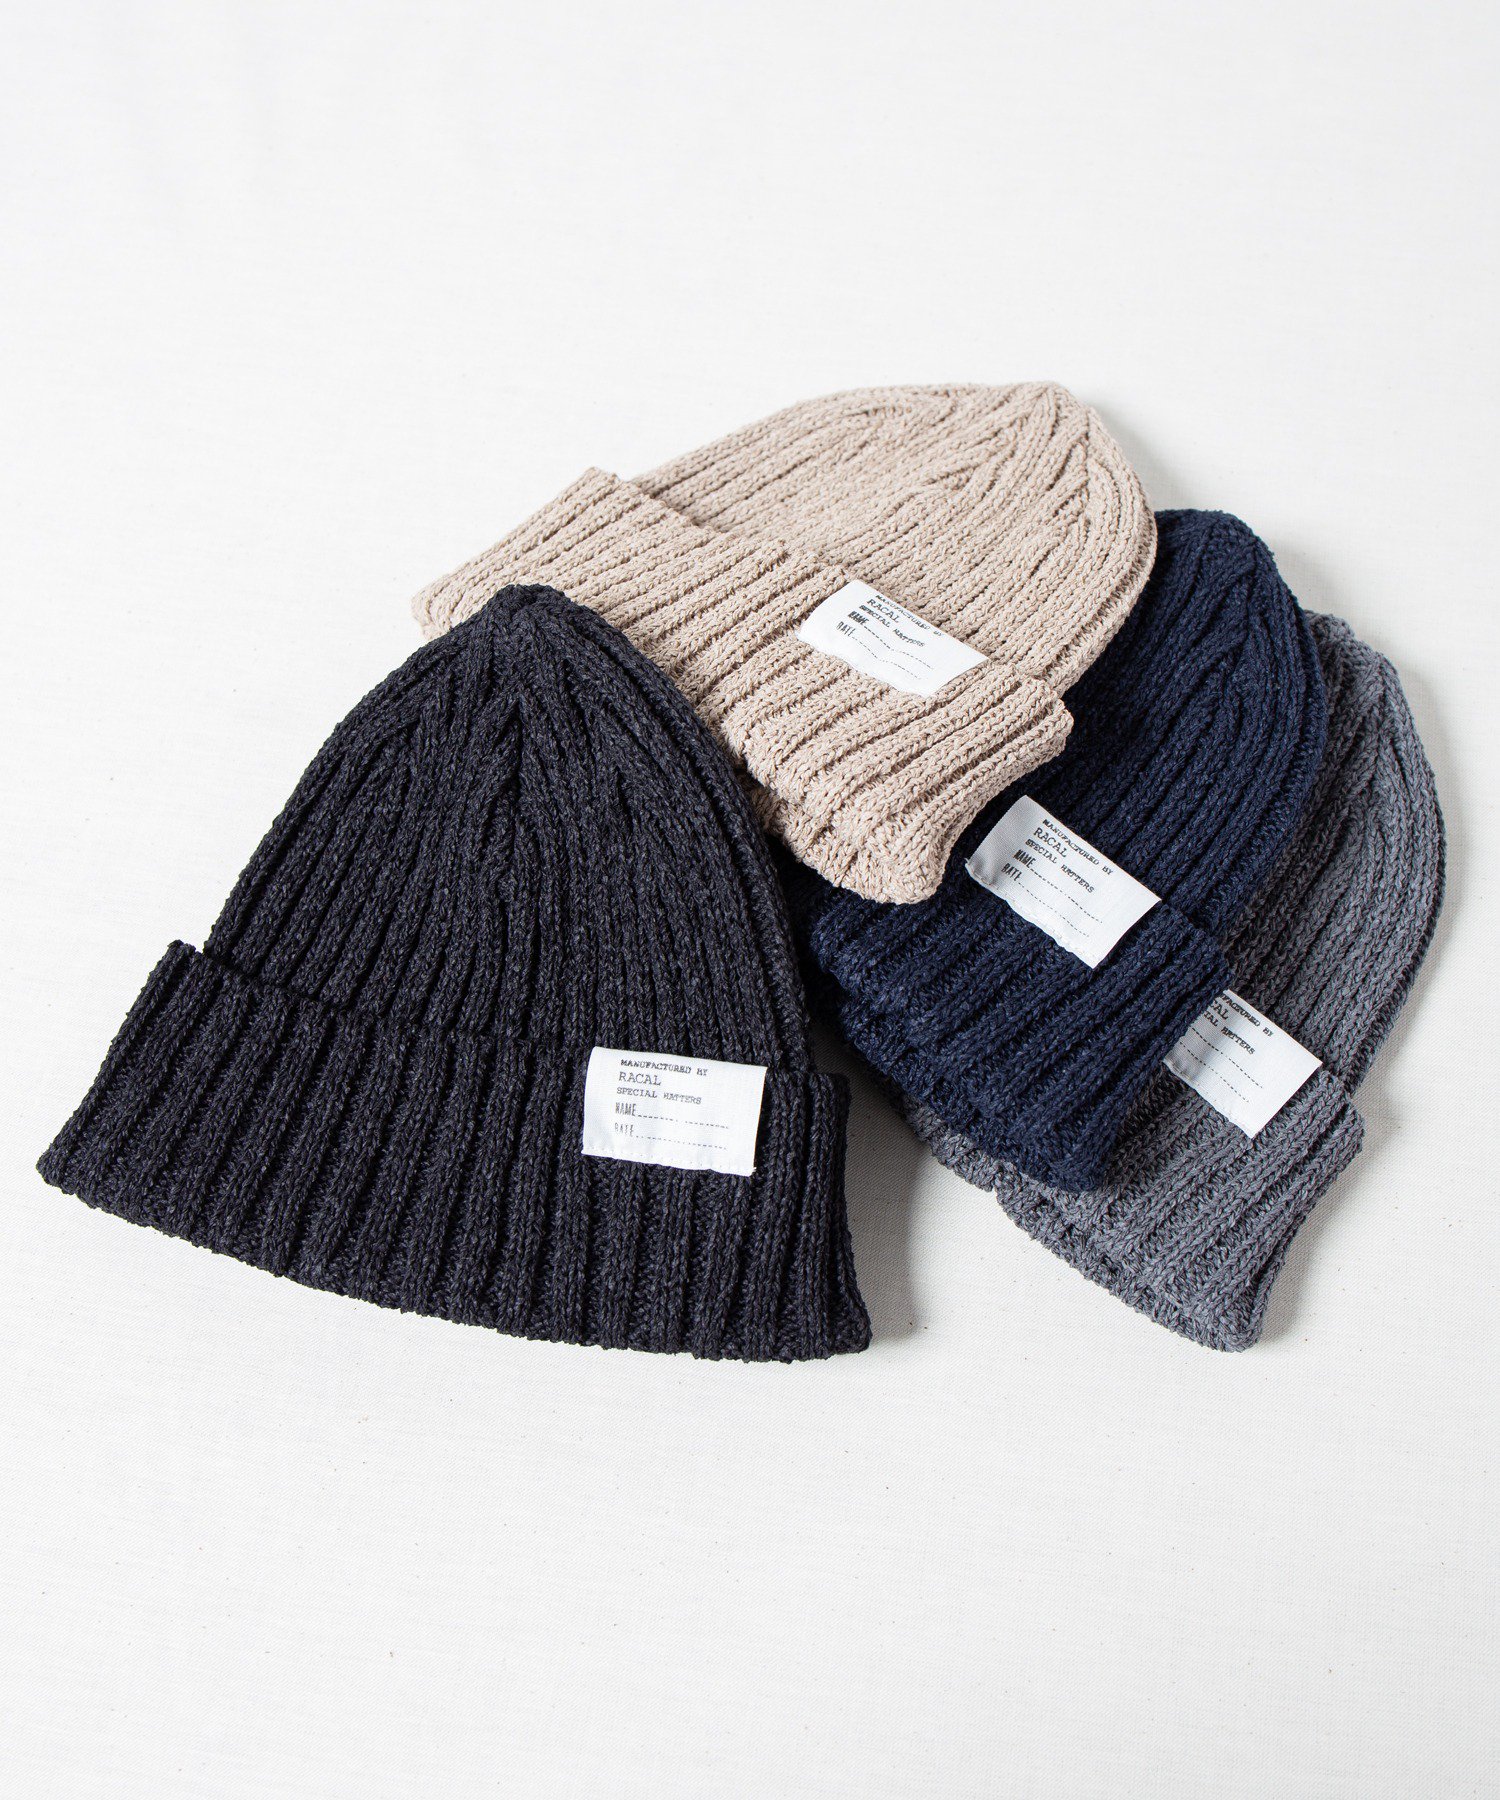 <img class='new_mark_img1' src='https://img.shop-pro.jp/img/new/icons15.gif' style='border:none;display:inline;margin:0px;padding:0px;width:auto;' />【Racal】 Japanese Paper Standard Knit Cap / 和紙混紡スタンダードニットキャップ